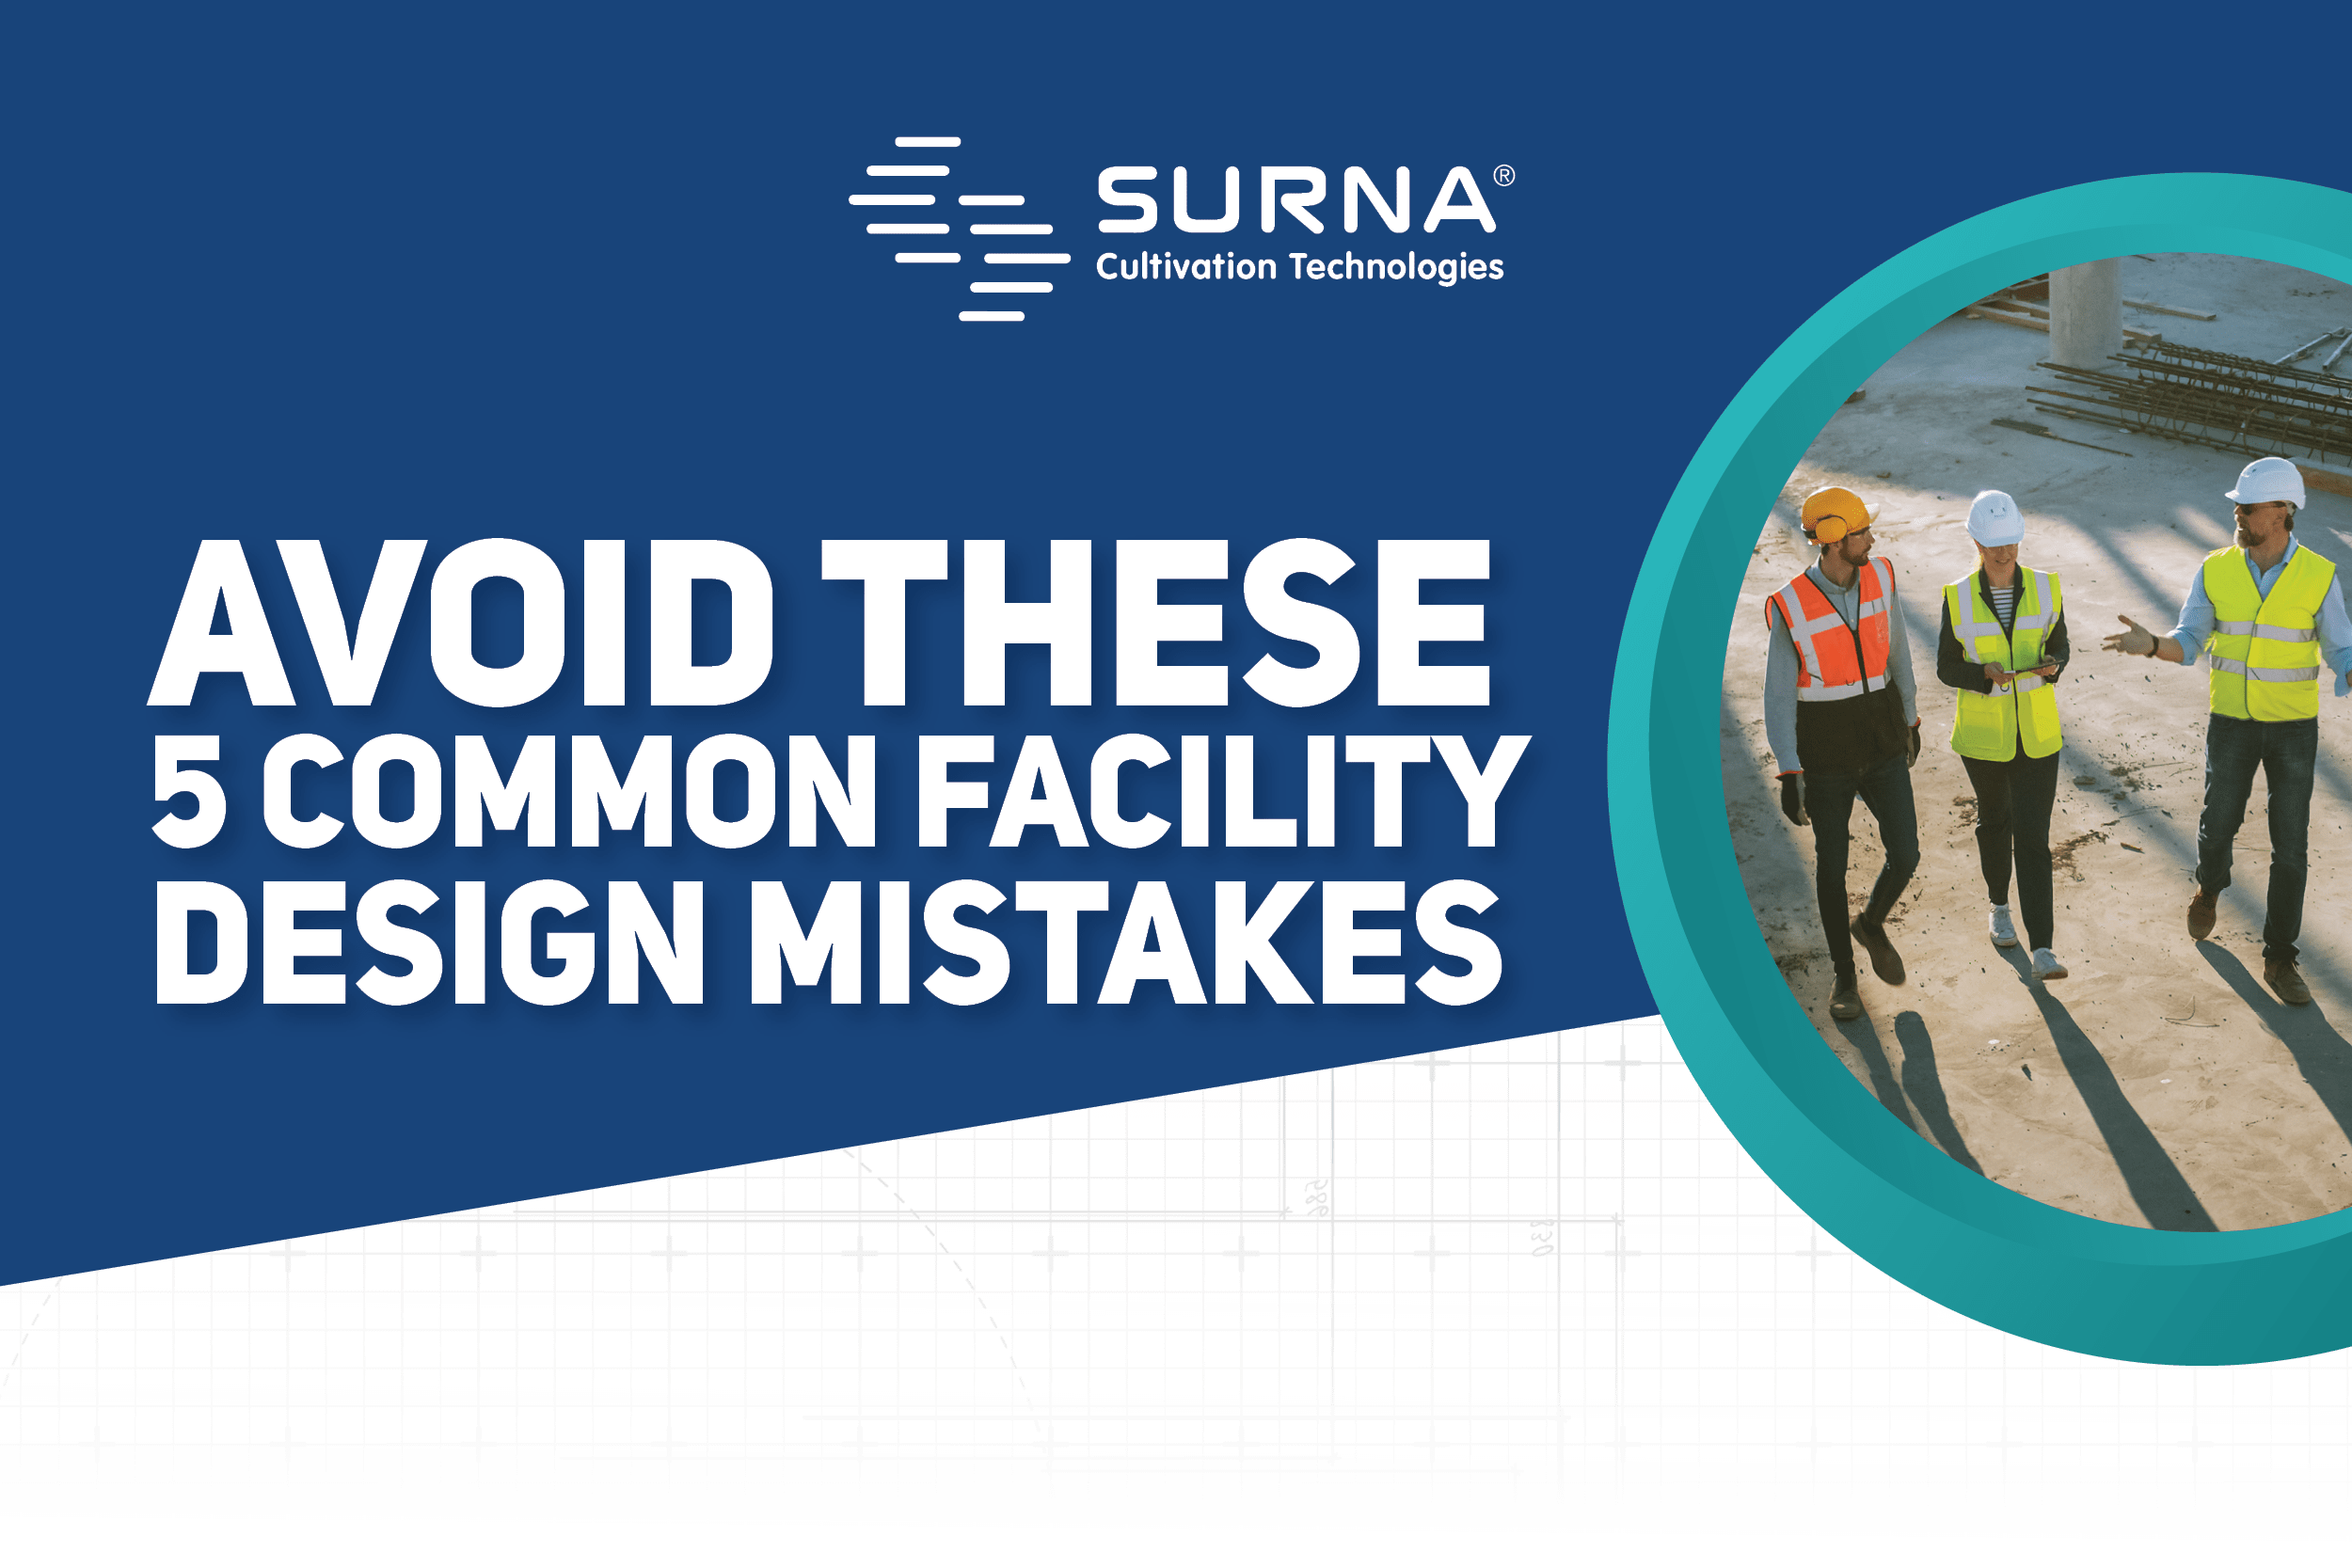 Avoid these 5 common facility design mistakes